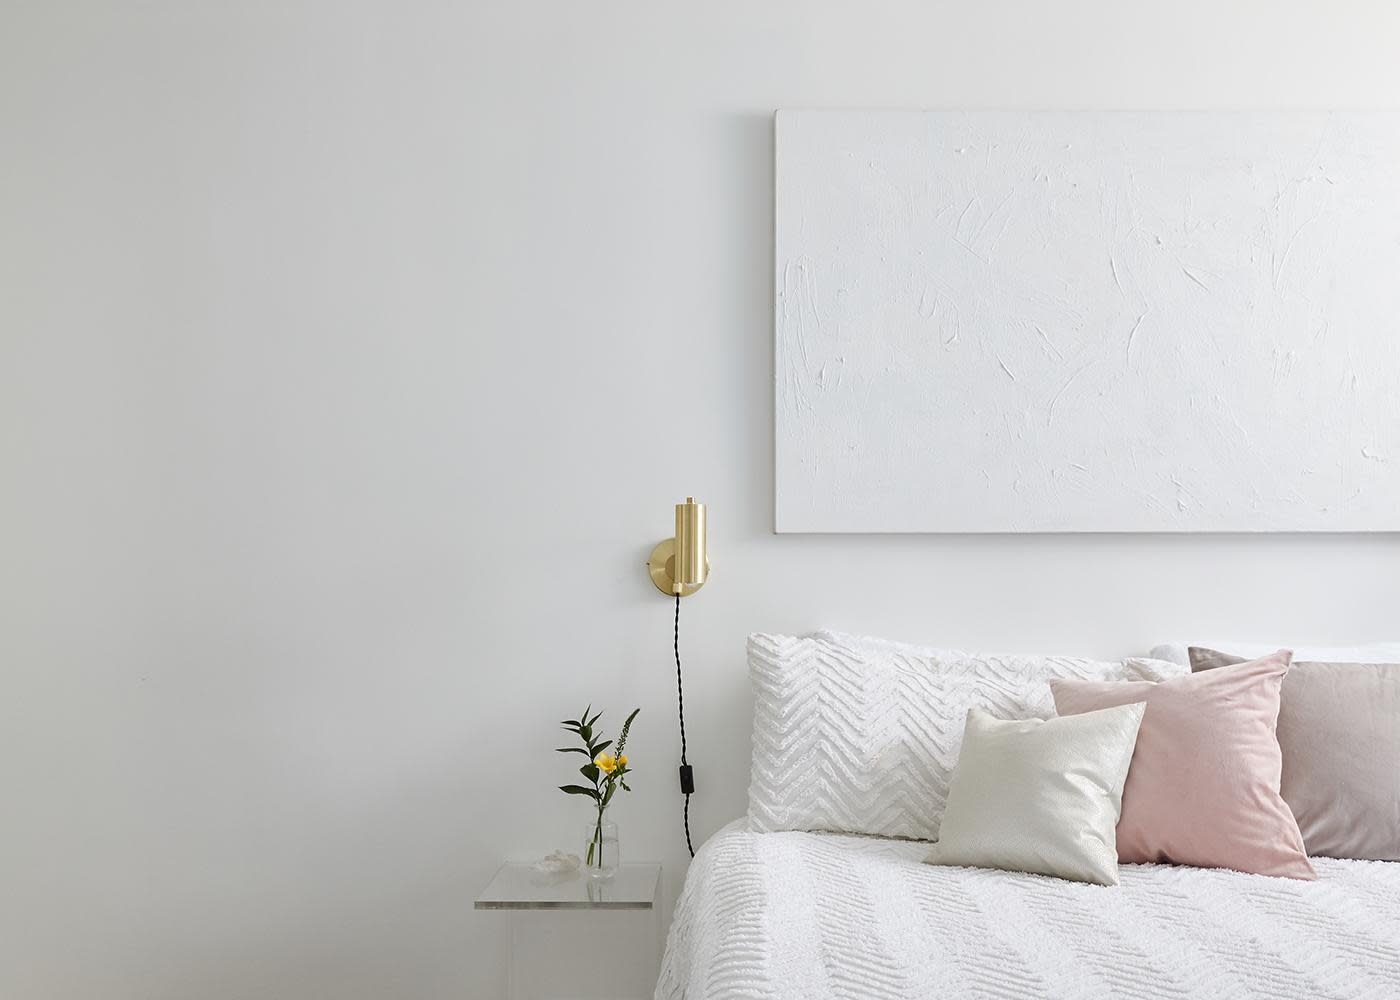 This stylish all-white bedroom makeover combines little luxuries and minimalist decor to create the ultimate bedroom retreat. See inside this dreamy space.